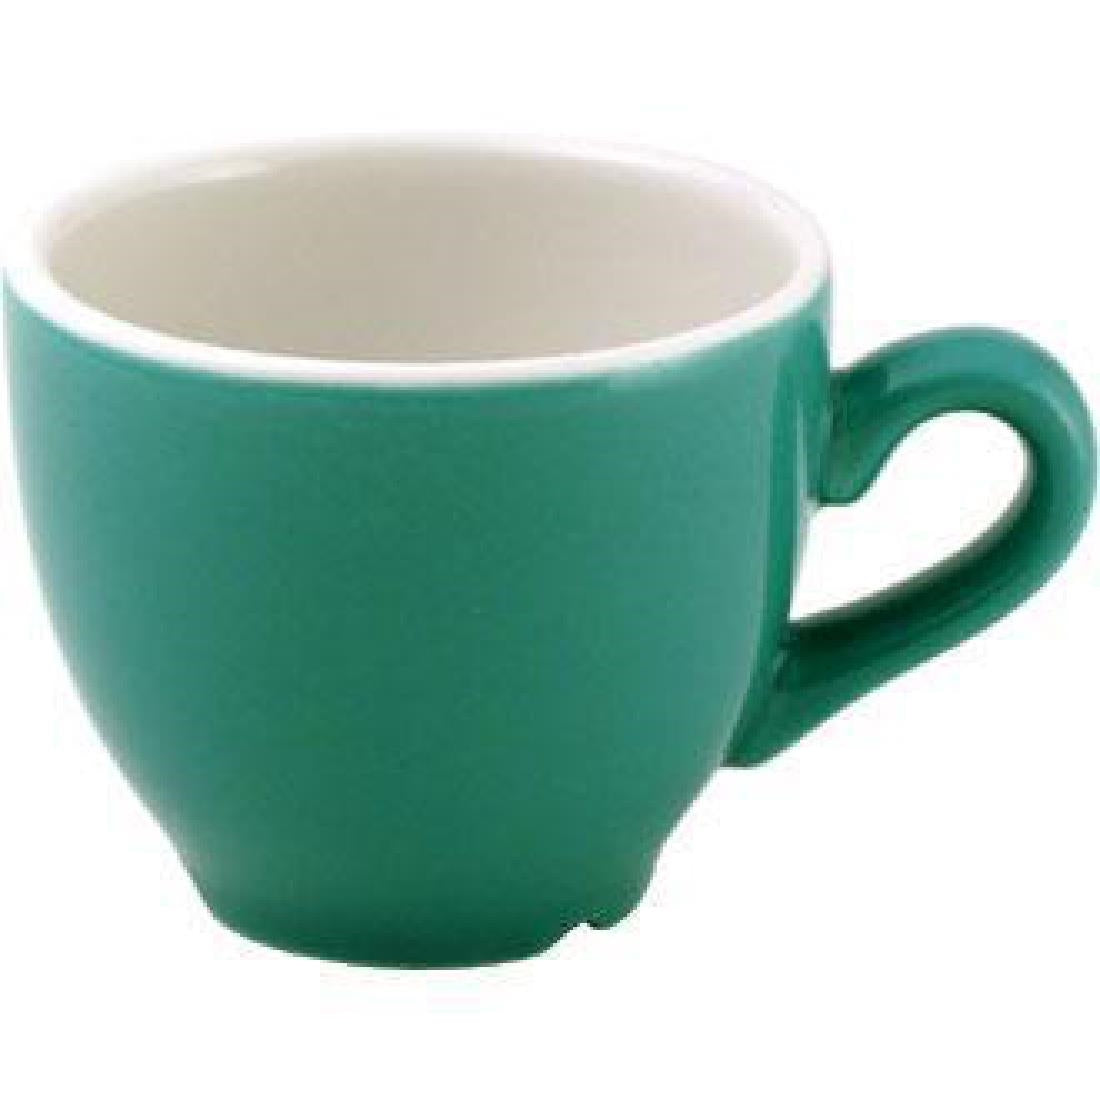 Churchill New Horizons Colour Glaze Espresso Cups Green 85ml (Pack of 24) JD Catering Equipment Solutions Ltd